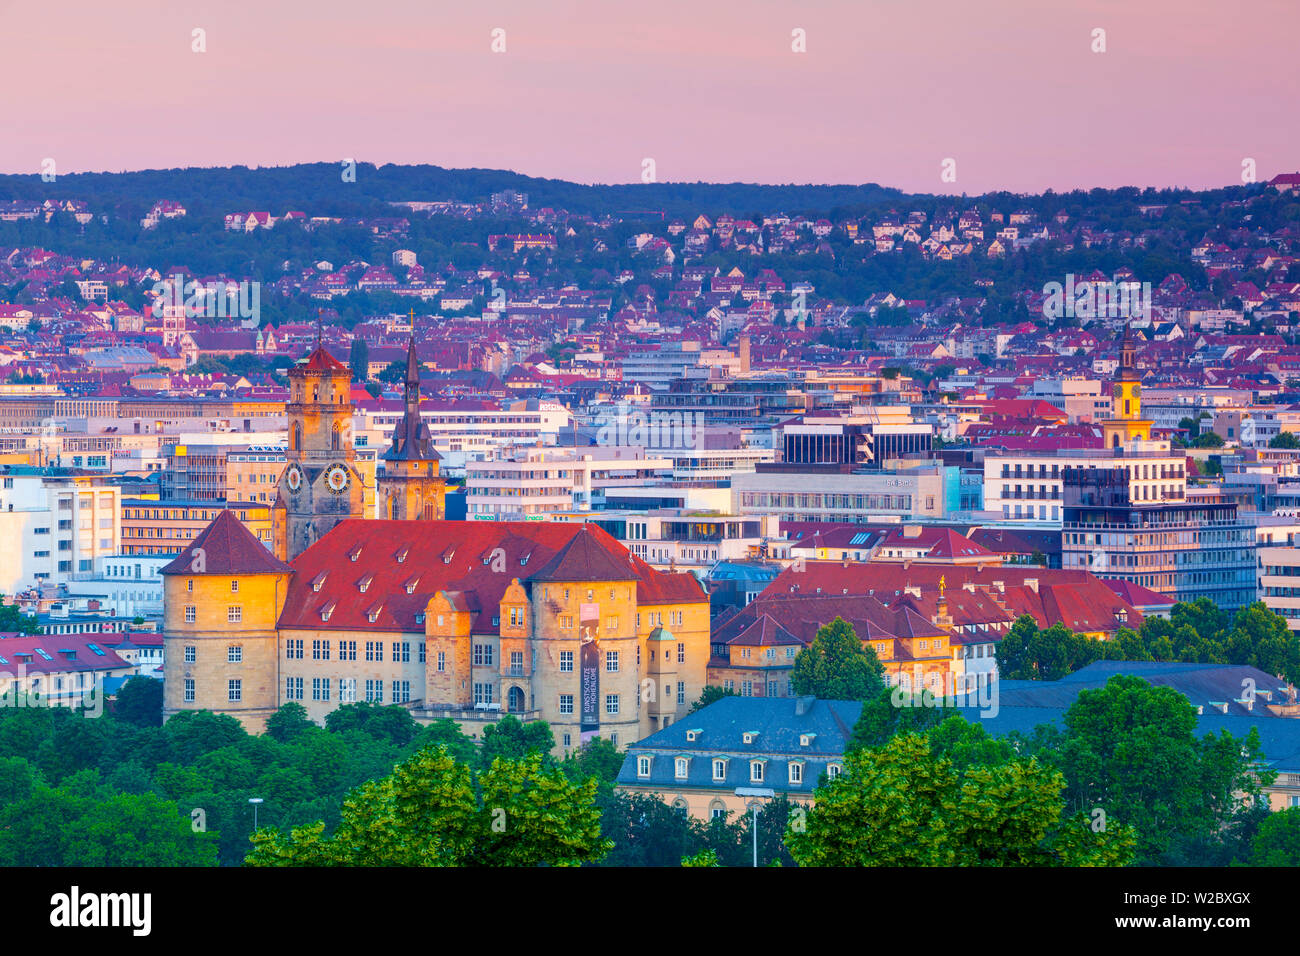 Stiftskirche (Collegiate Church) and Central City Overview illuminated at Sunrise, Stuttgart, Baden-Wurttemberg, Germany Stock Photo